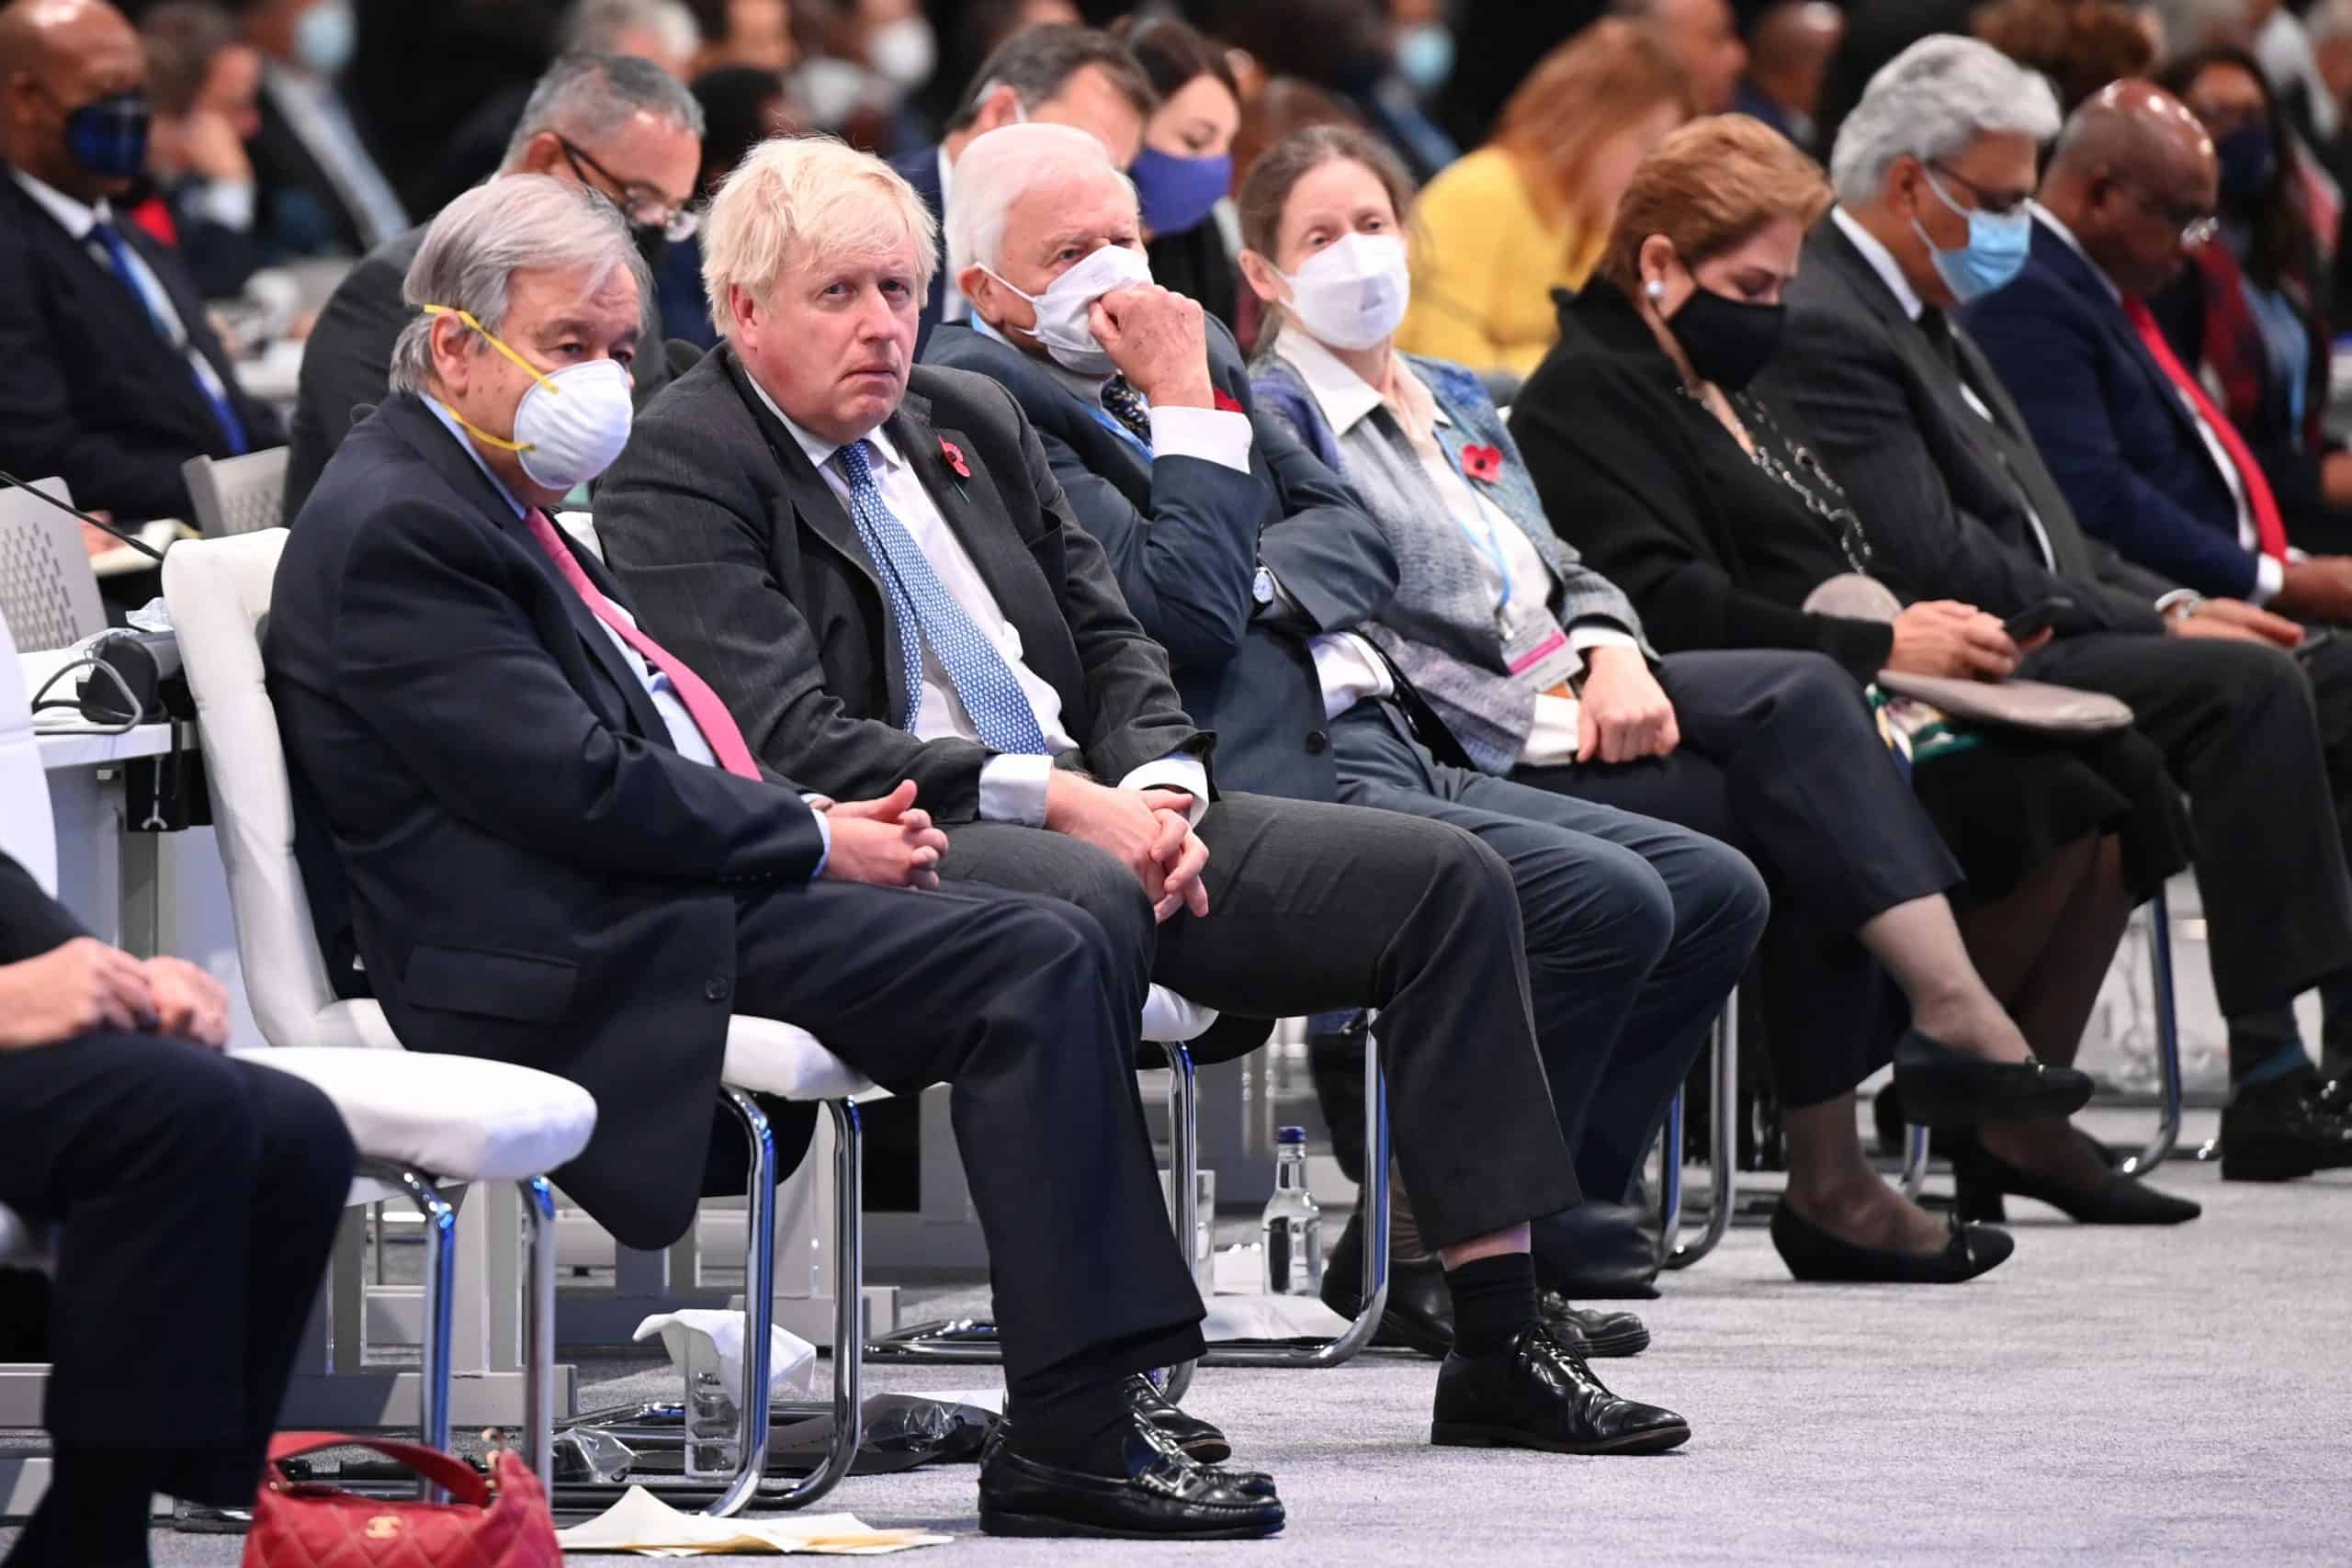 Boris Johnson tells Brits: wearing a mask is the ‘responsible thing to do’